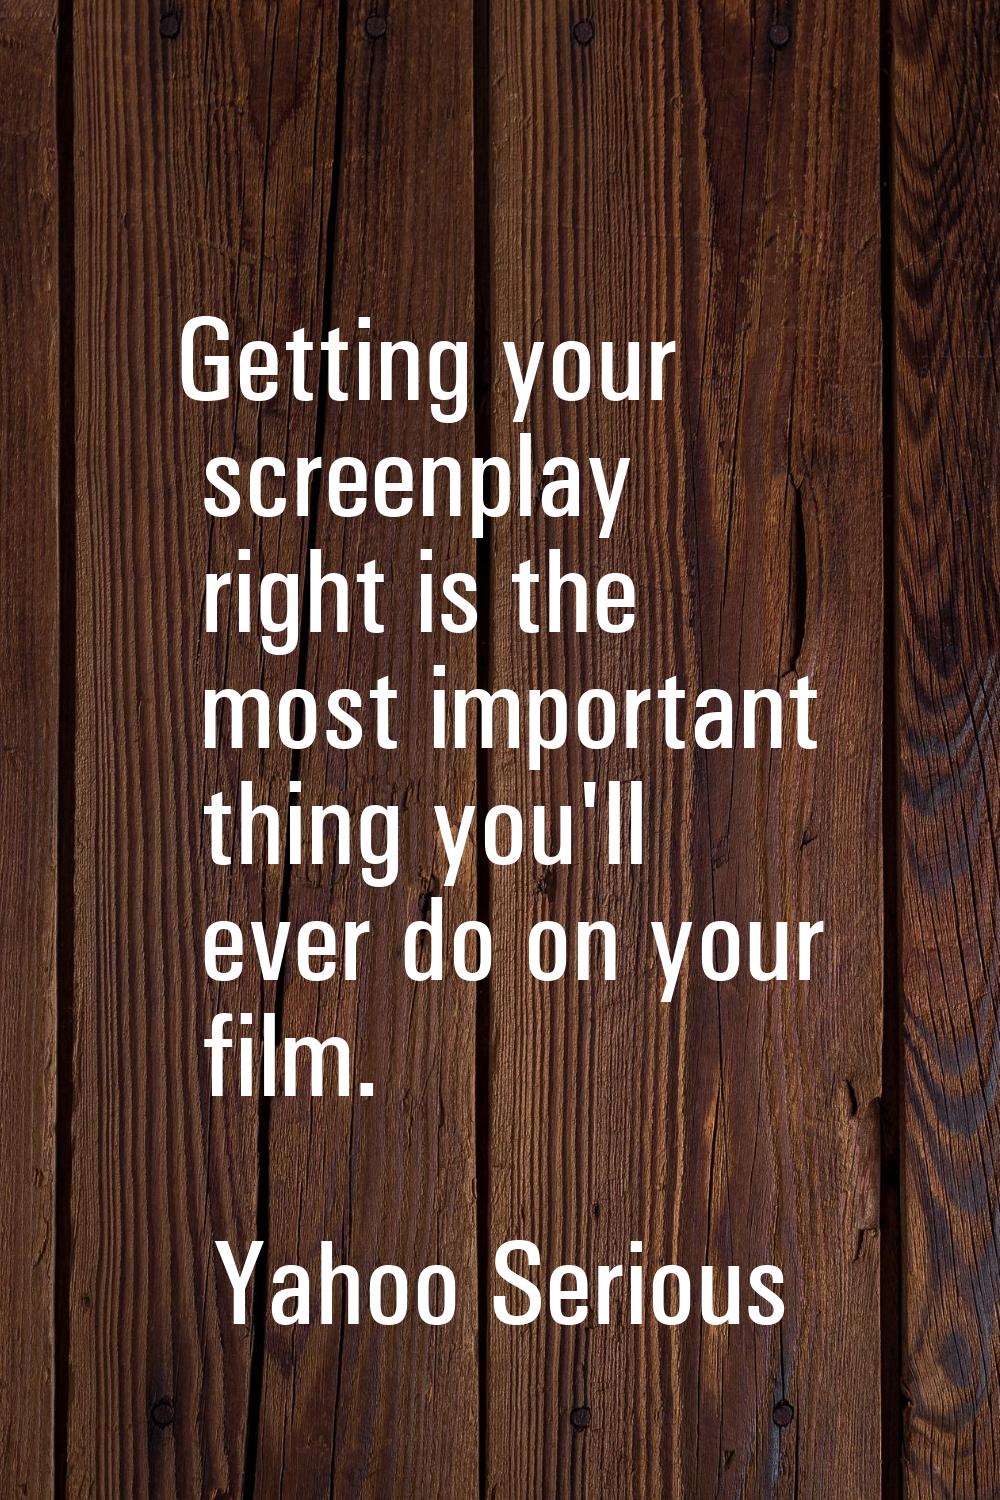 Getting your screenplay right is the most important thing you'll ever do on your film.